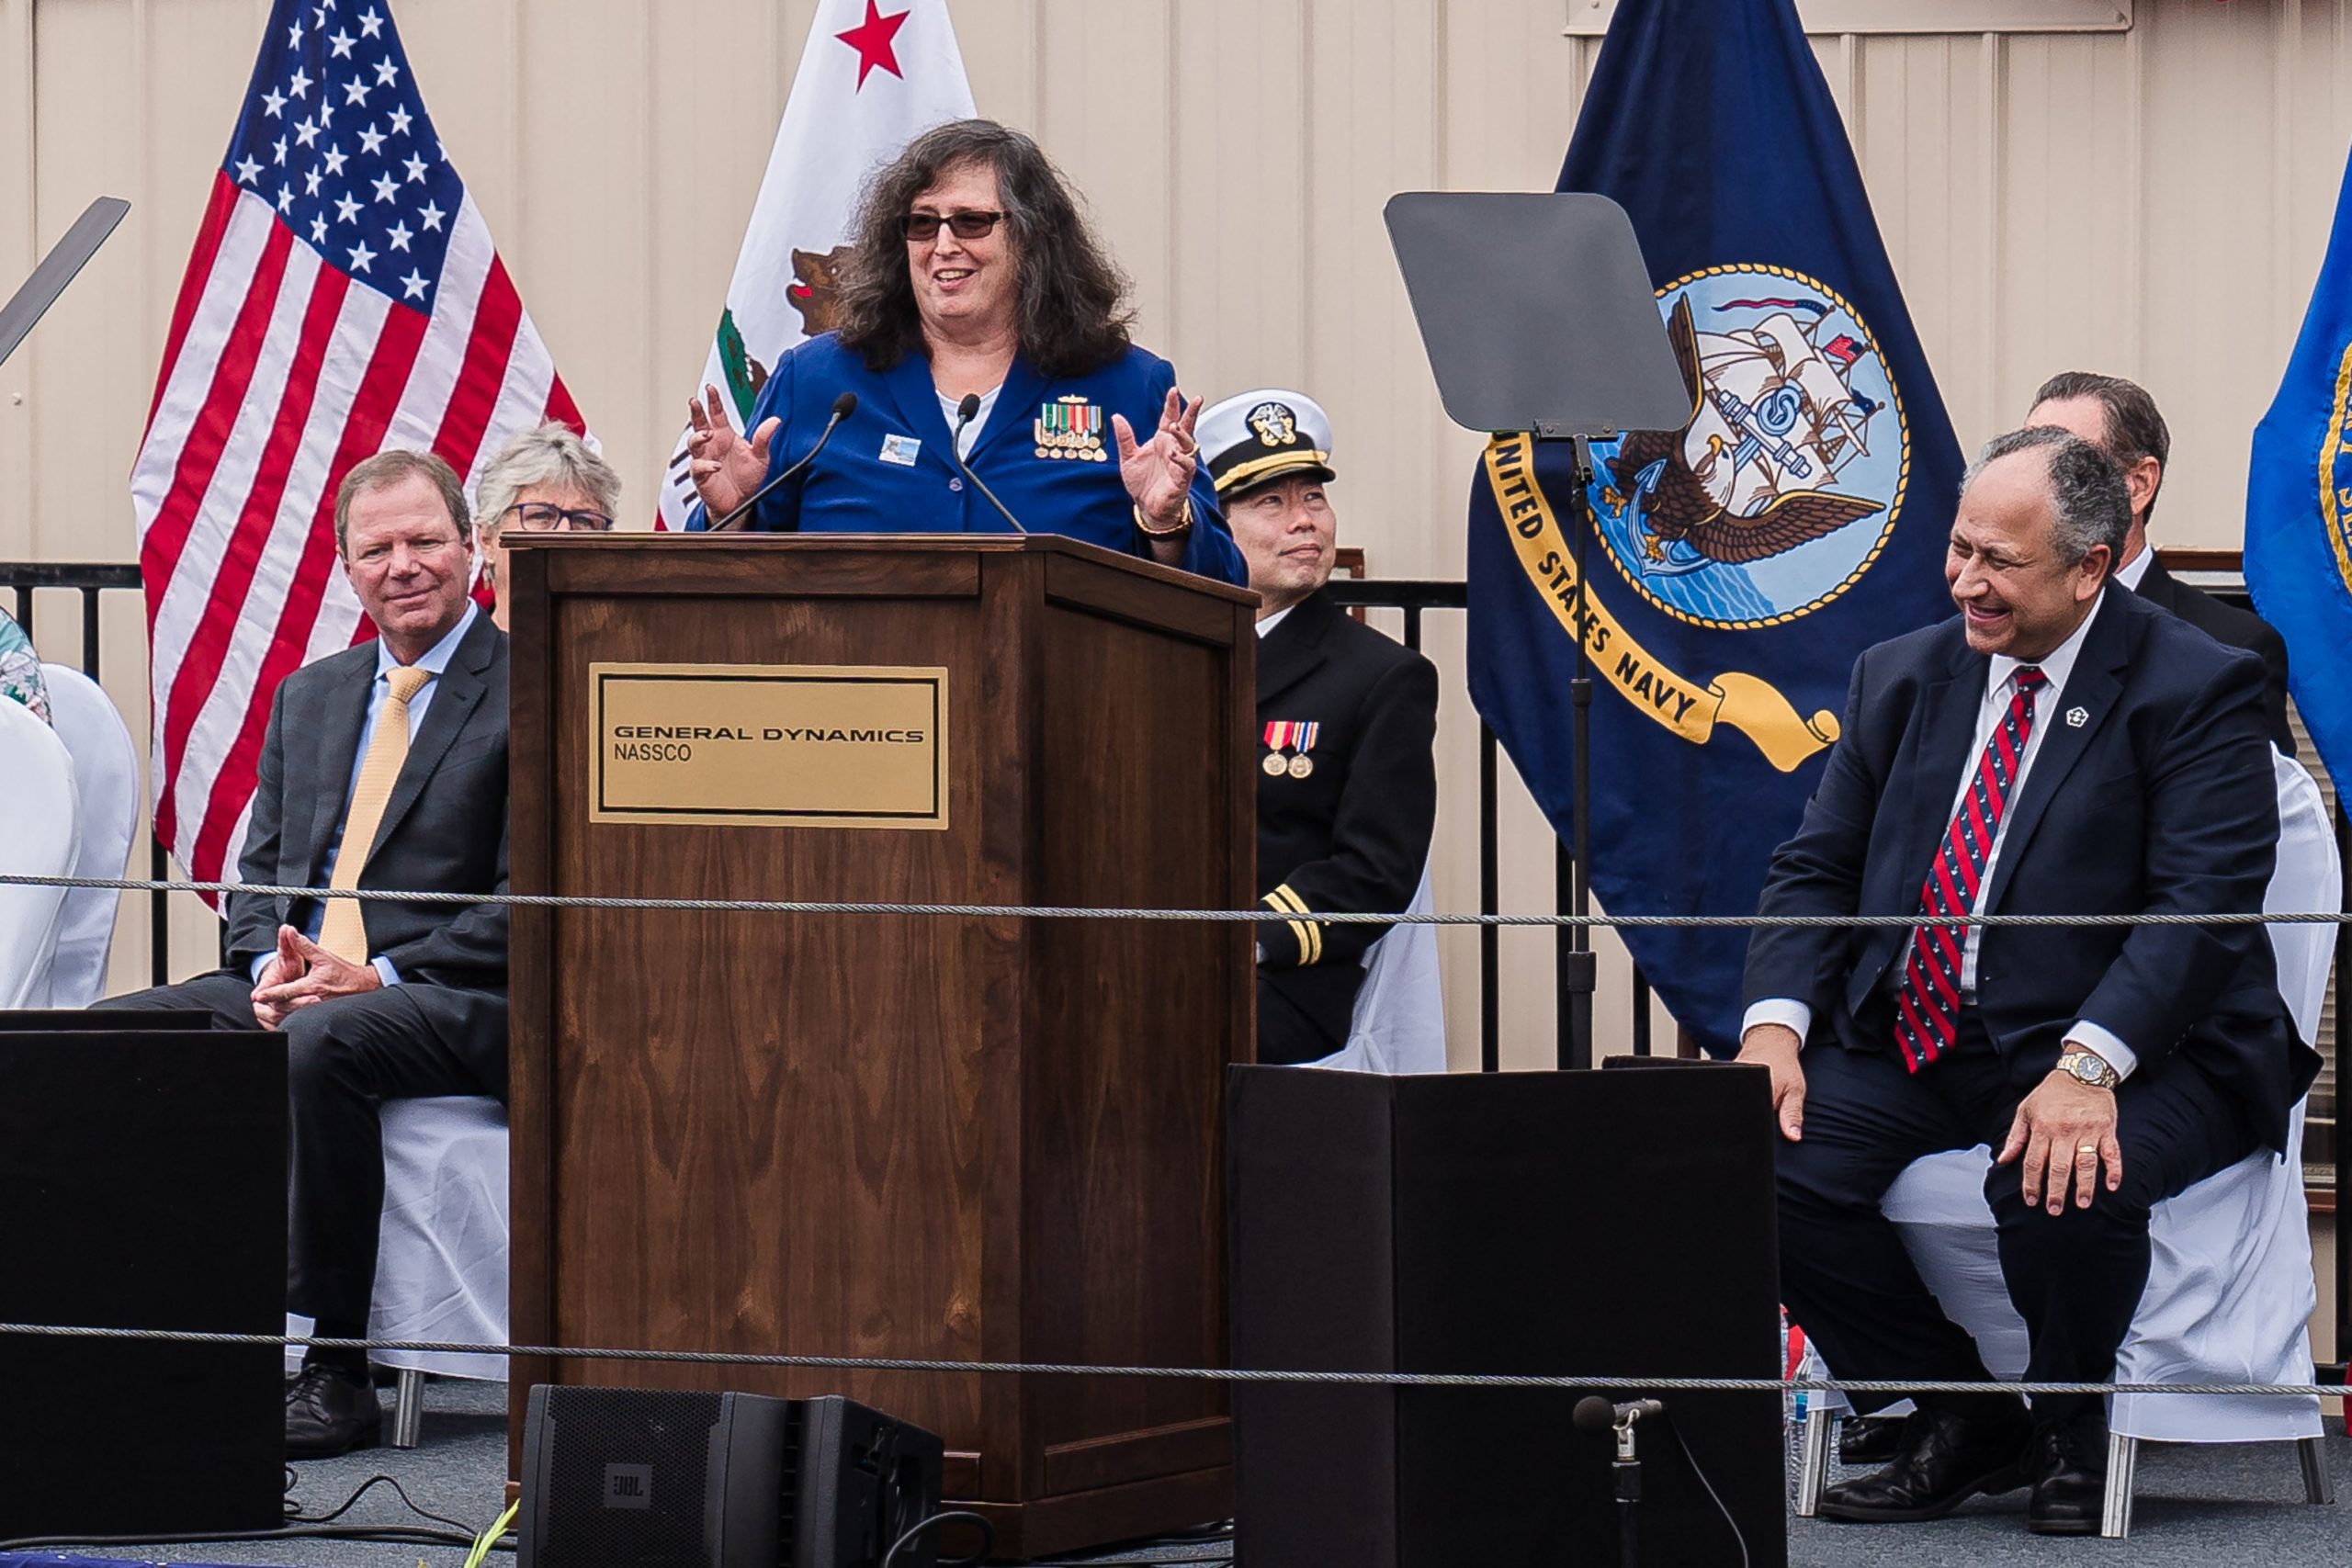 Paula M. Neira, Clinical Program Director, John Hopkins Center for Transgender Health speaks during the ceremonial address for the USNS Harvey Milk at General Dynamics NASSCO shipyard in San Diego, California on November 6, 2021. - One of the first openly gay politicians in the United States, who was assassinated four decades ago, will have a ship named after him this weekend, as the US military looks to keep step with modern-day social attitudes. The USNS Harvey Milk honours a former navy diver who served at a time there was a ban on homosexuality in the armed forces, and who was later shot dead in San Francisco, months after winning public office. 